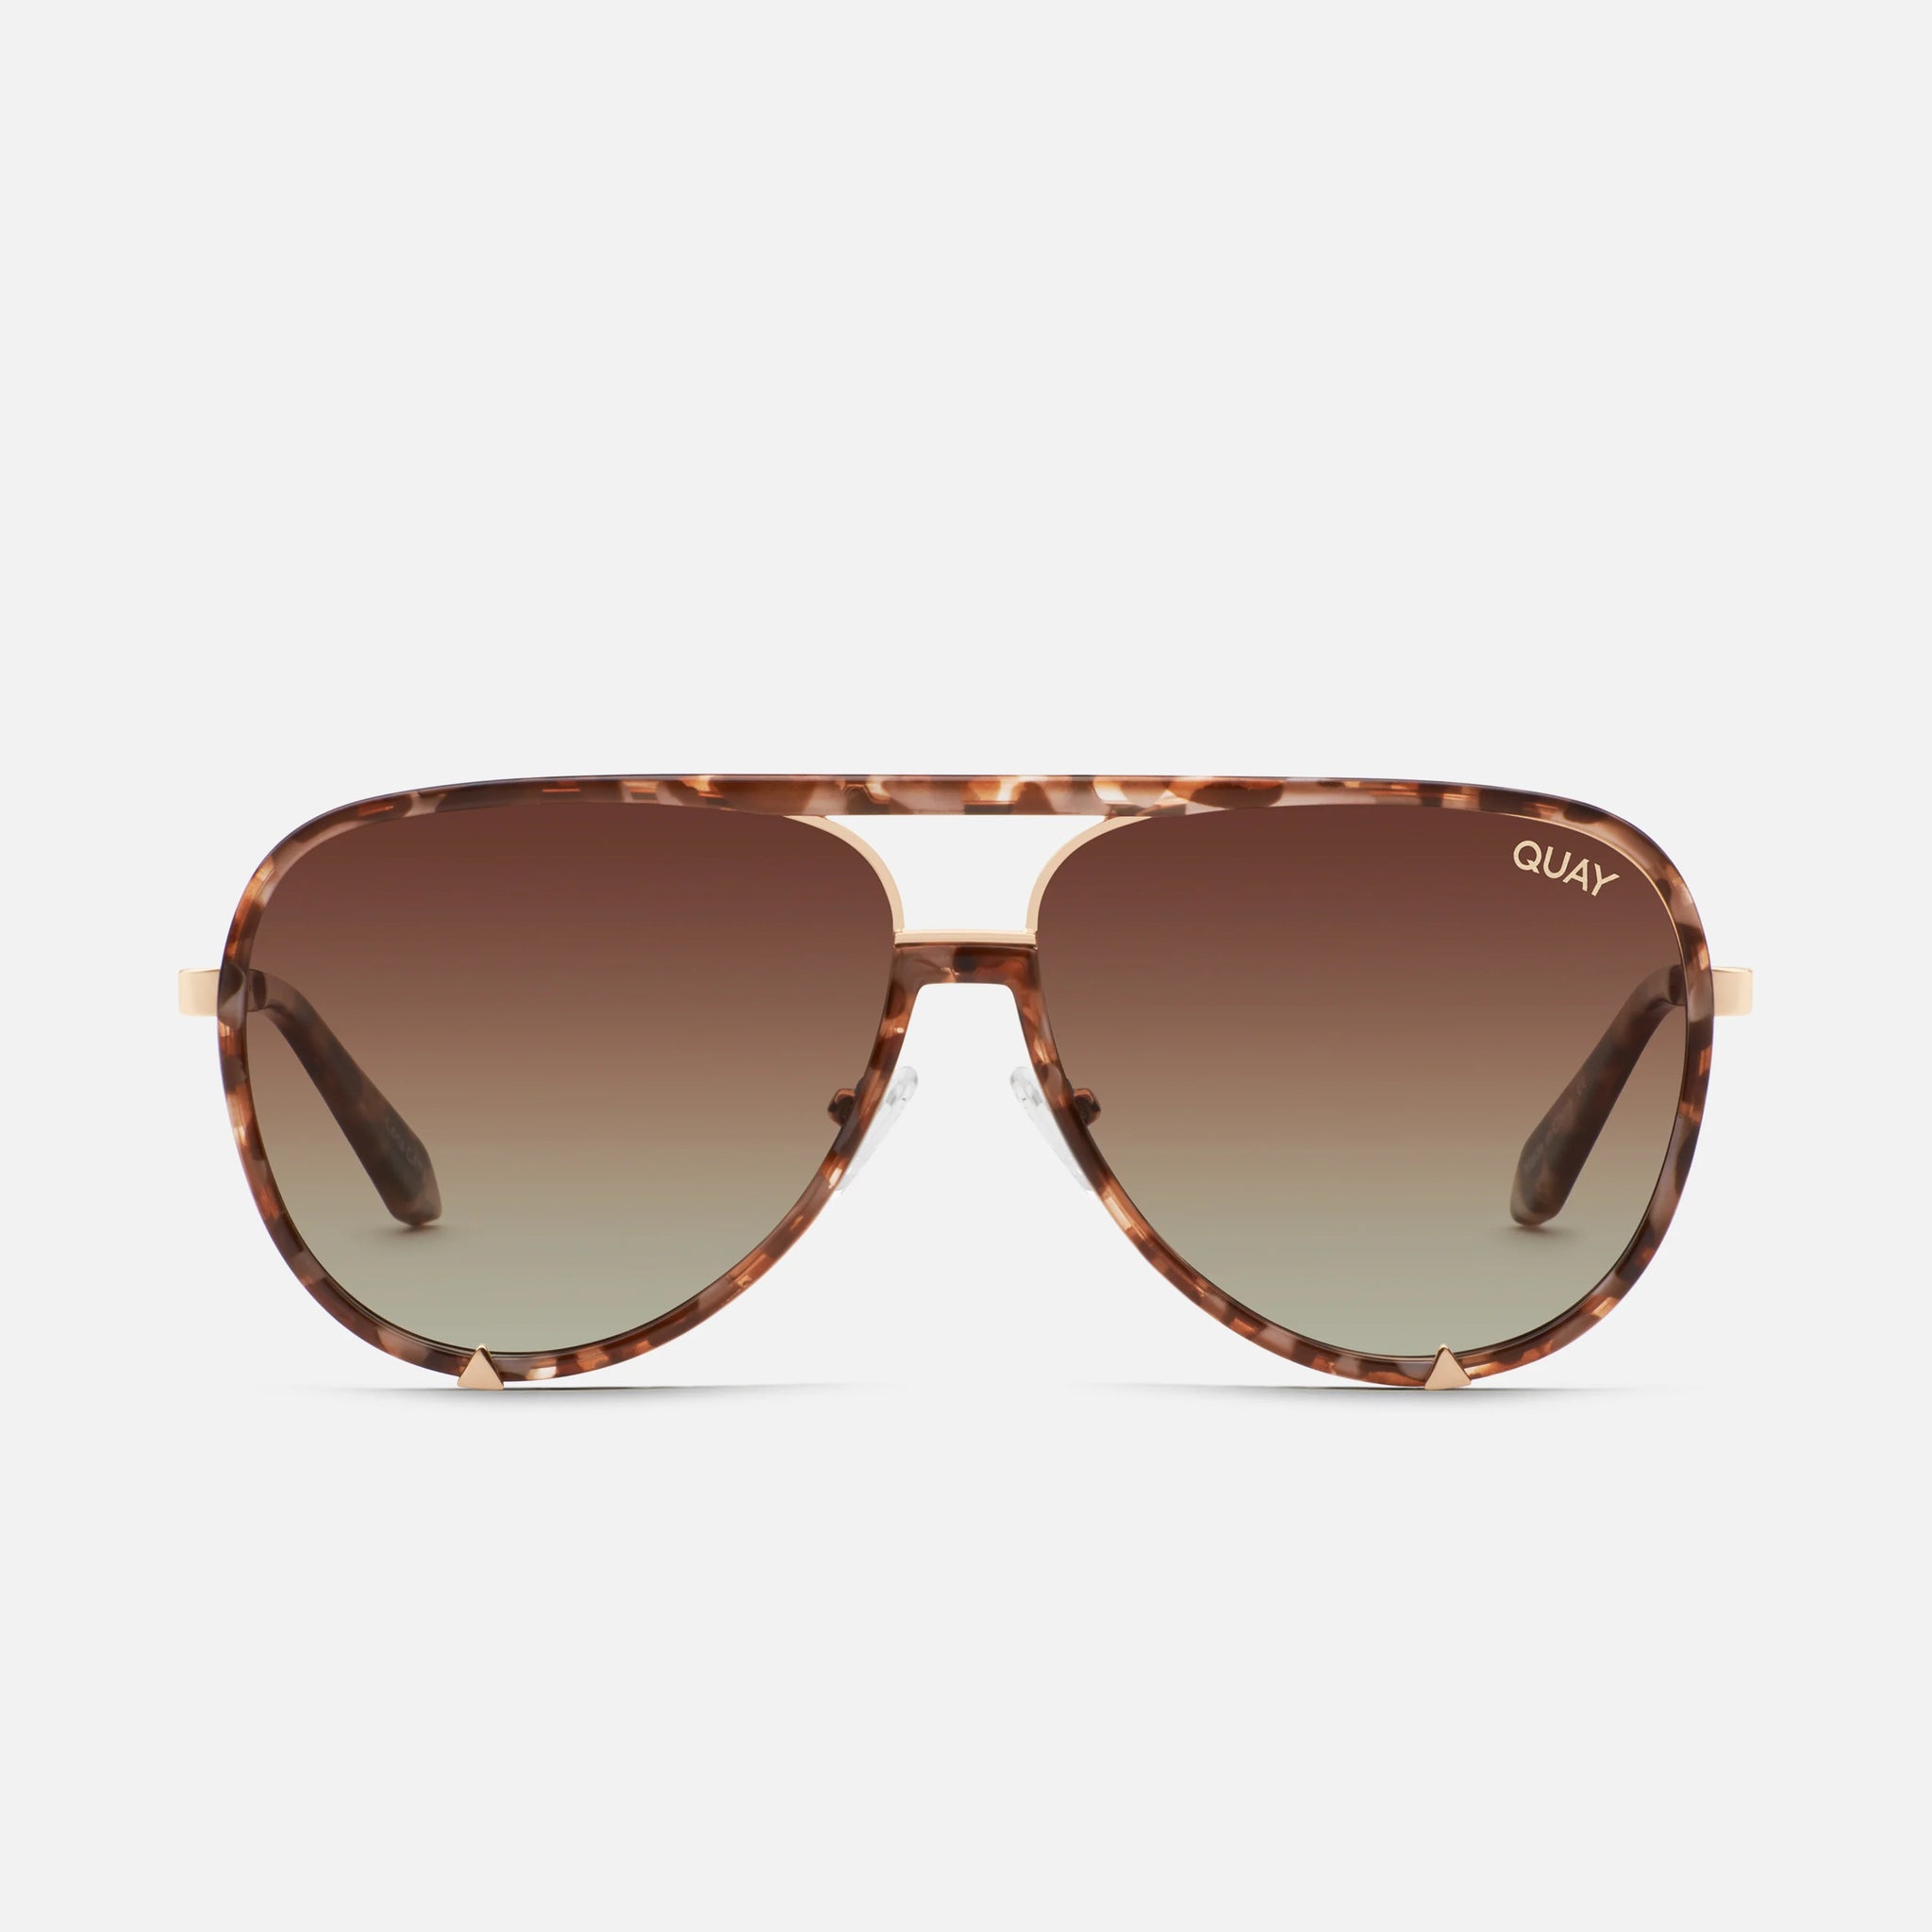 QUAY High Profile Luxe Sunglasses - Brown Tortoise/Brown Polarized